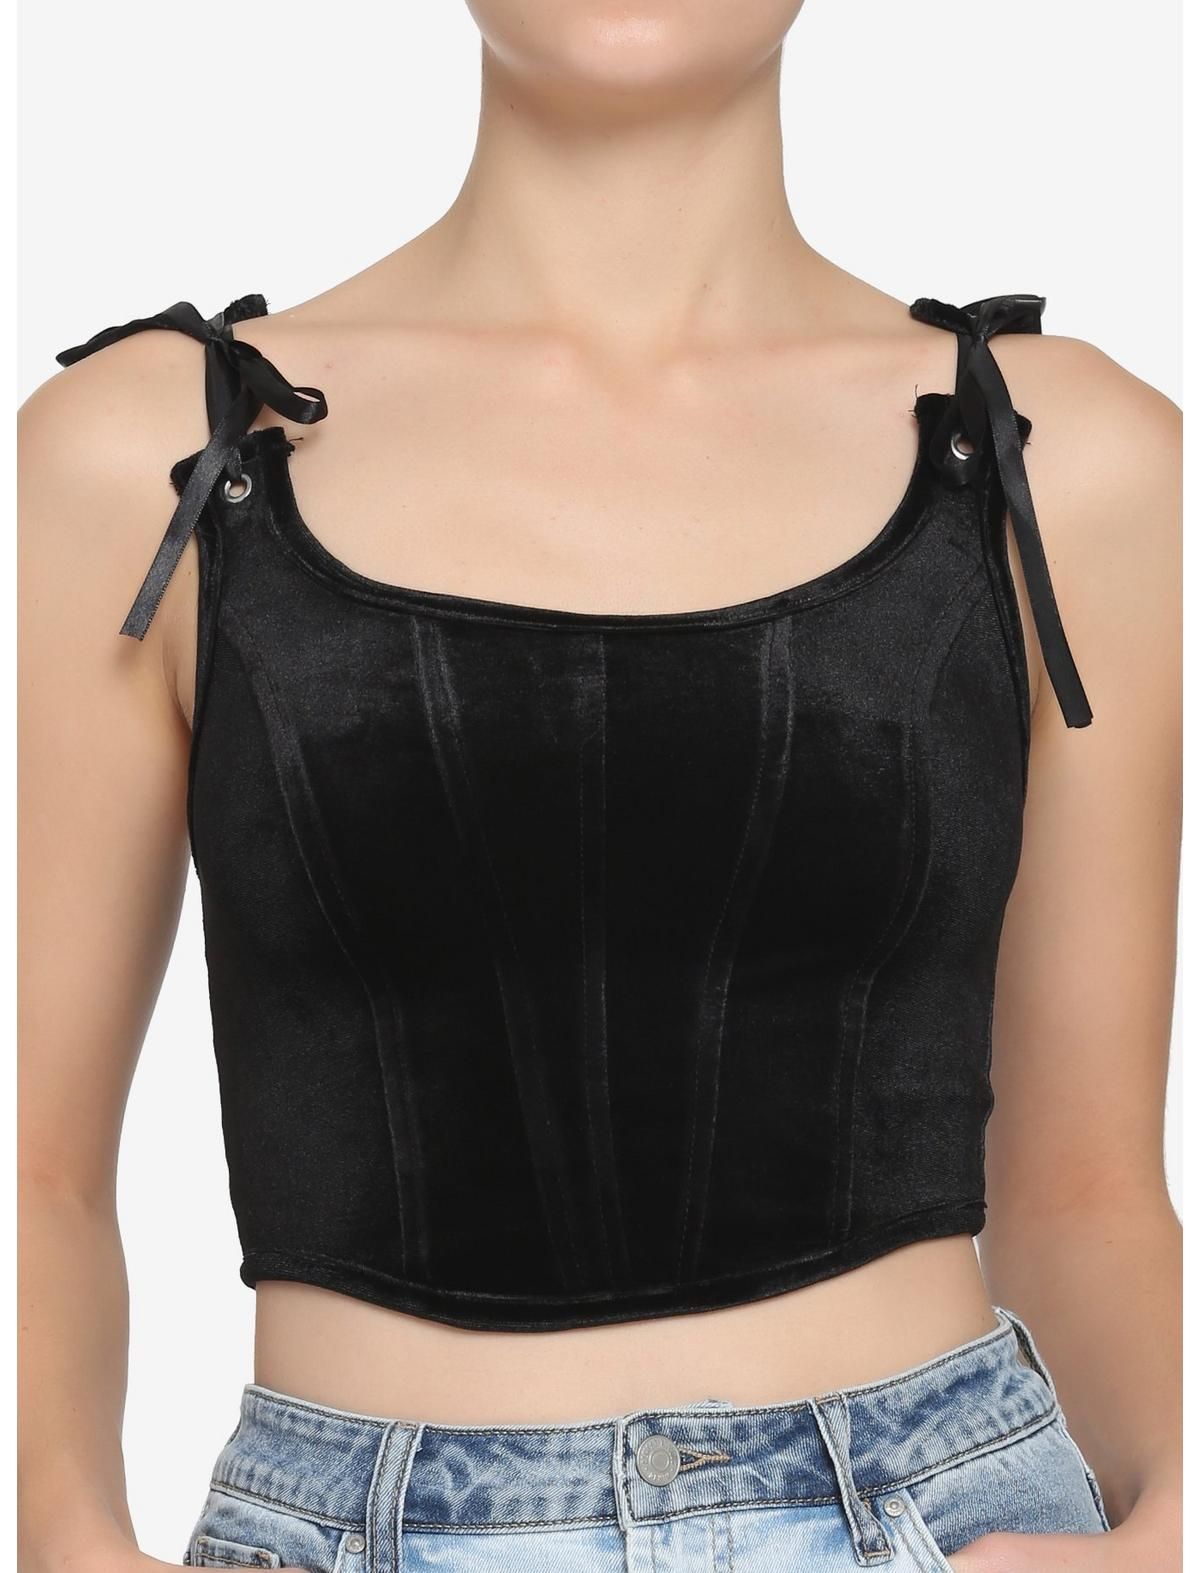 Black Velvet Lace-Up Girls Corset Top | Hot Topic | Hot Topic